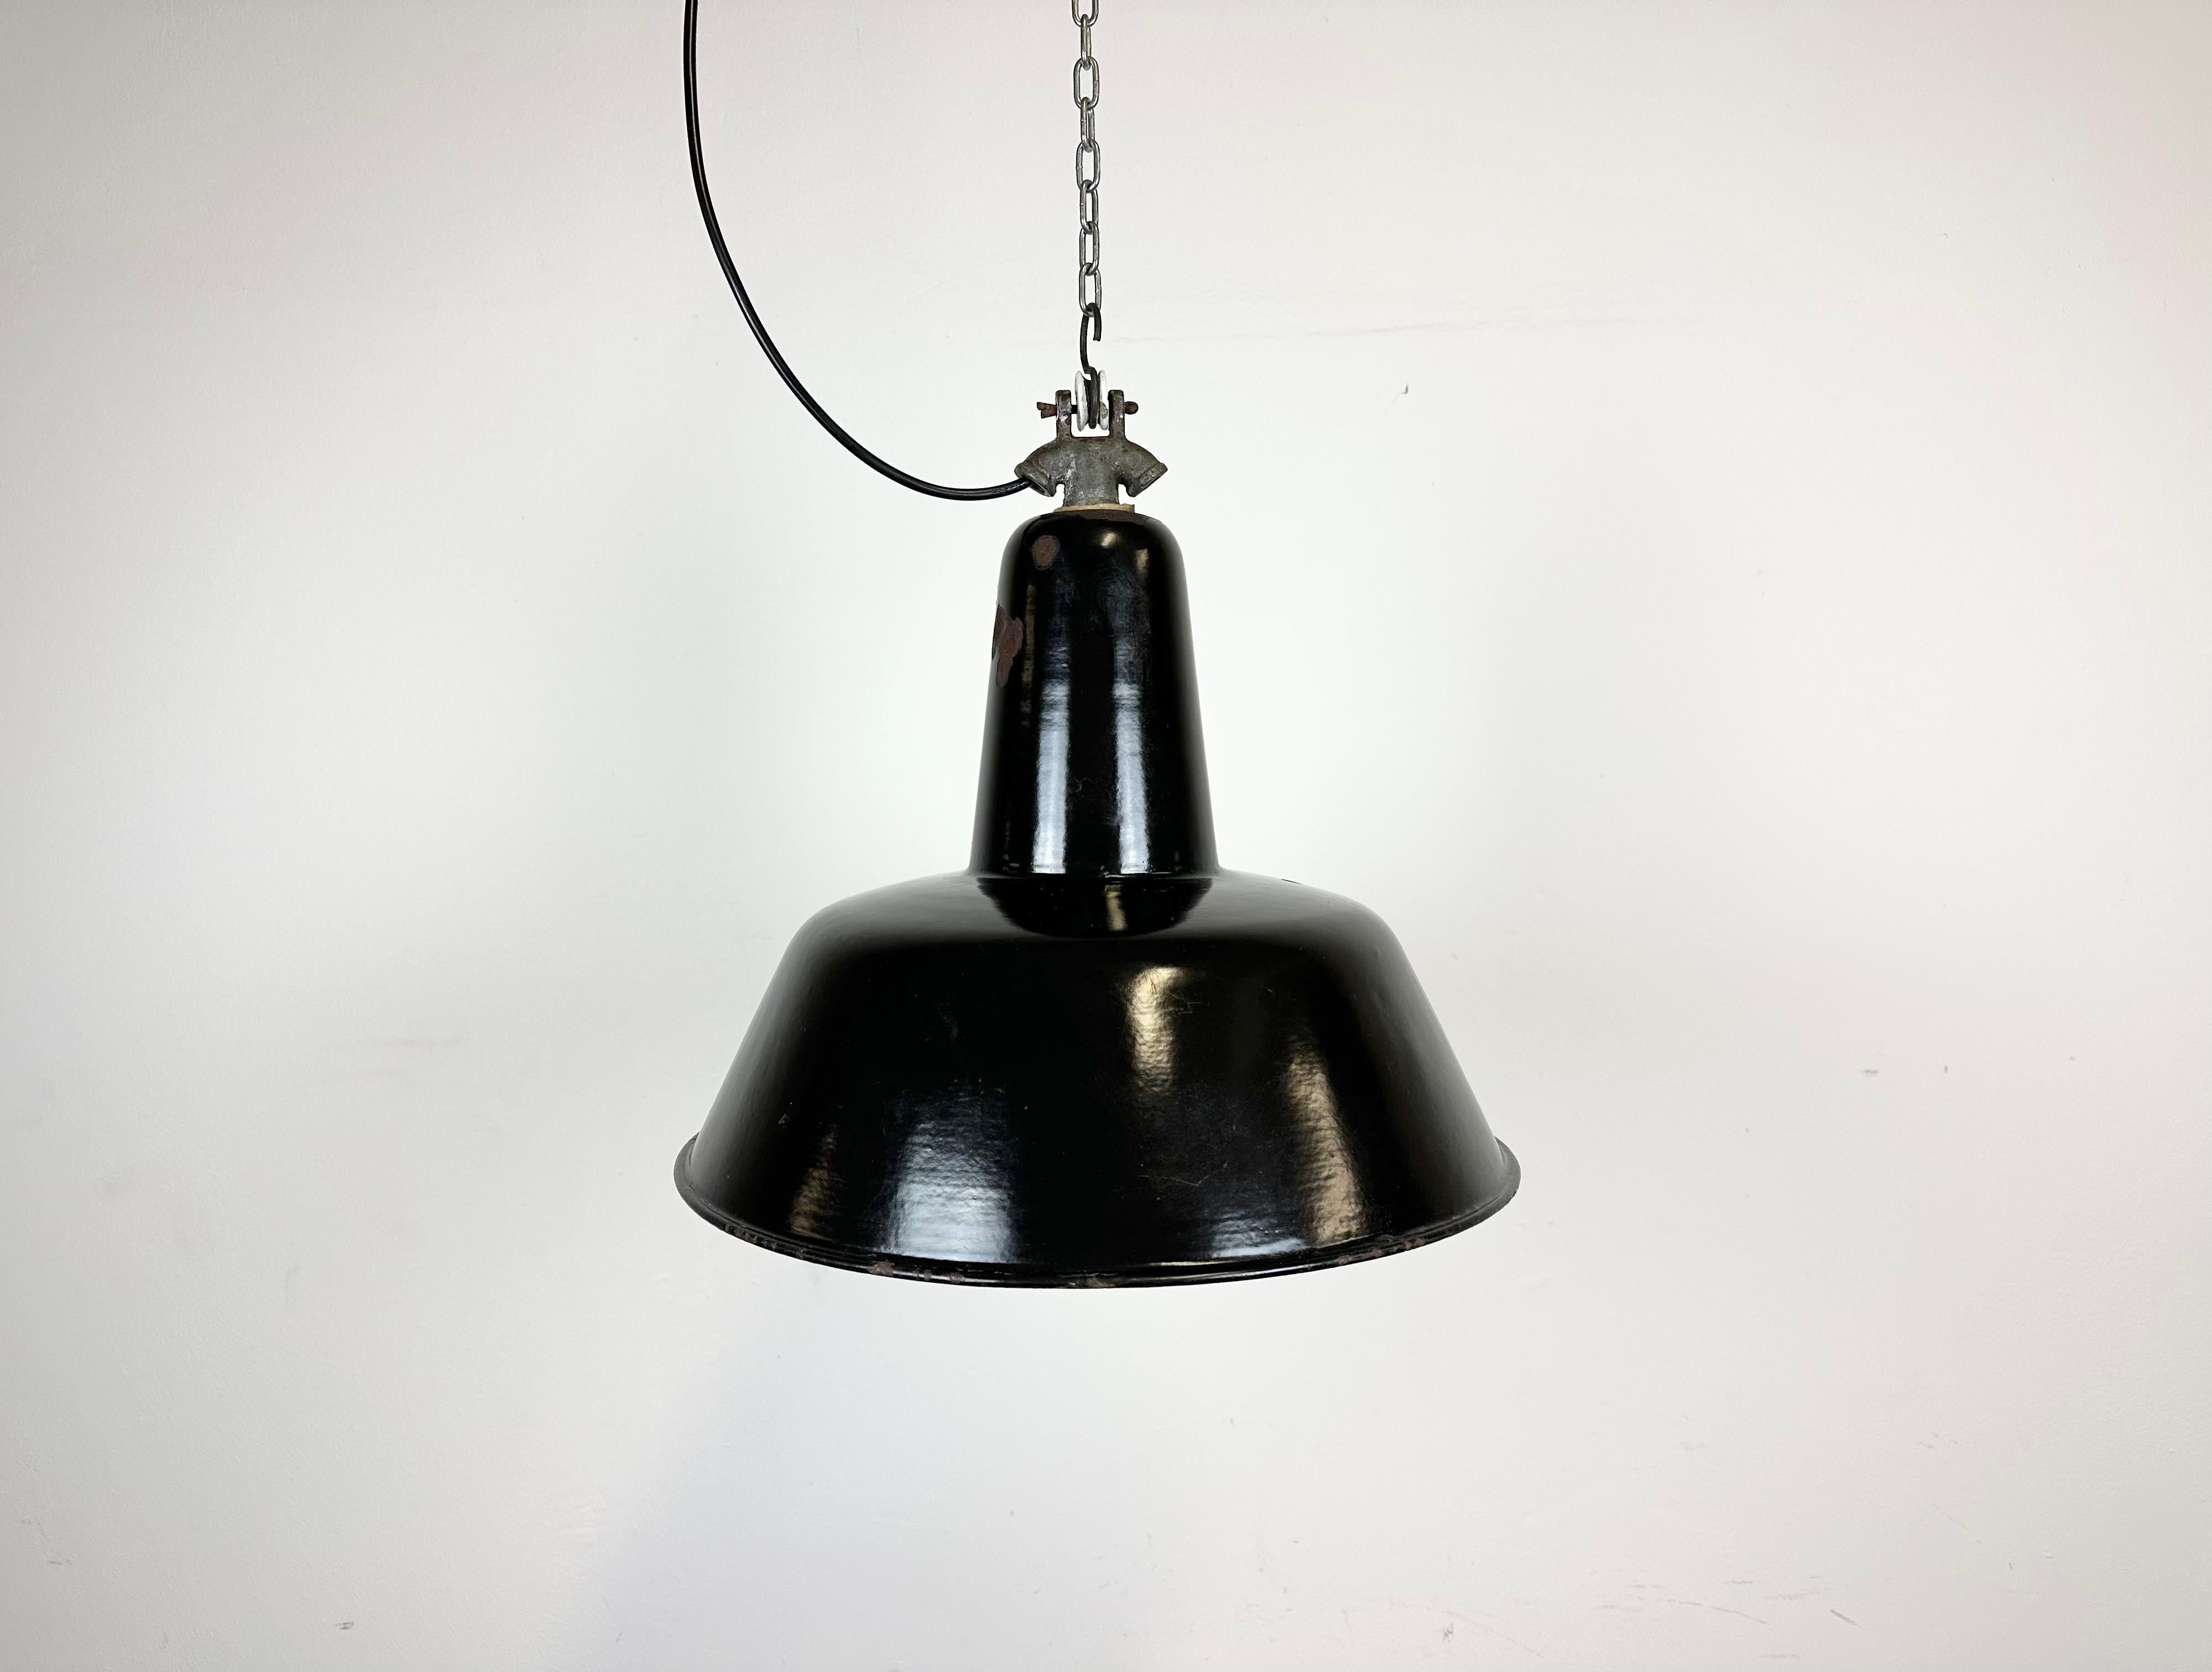 Industrial black enamel pendant light made in former Czechoslovakia during the 1950s. White enamel inside the shade. Cast iron top. The porcelain socket requires E 27/ E26 light bulbs. New wire. Fully functional. The weight of the lamp is 1 .4kg.